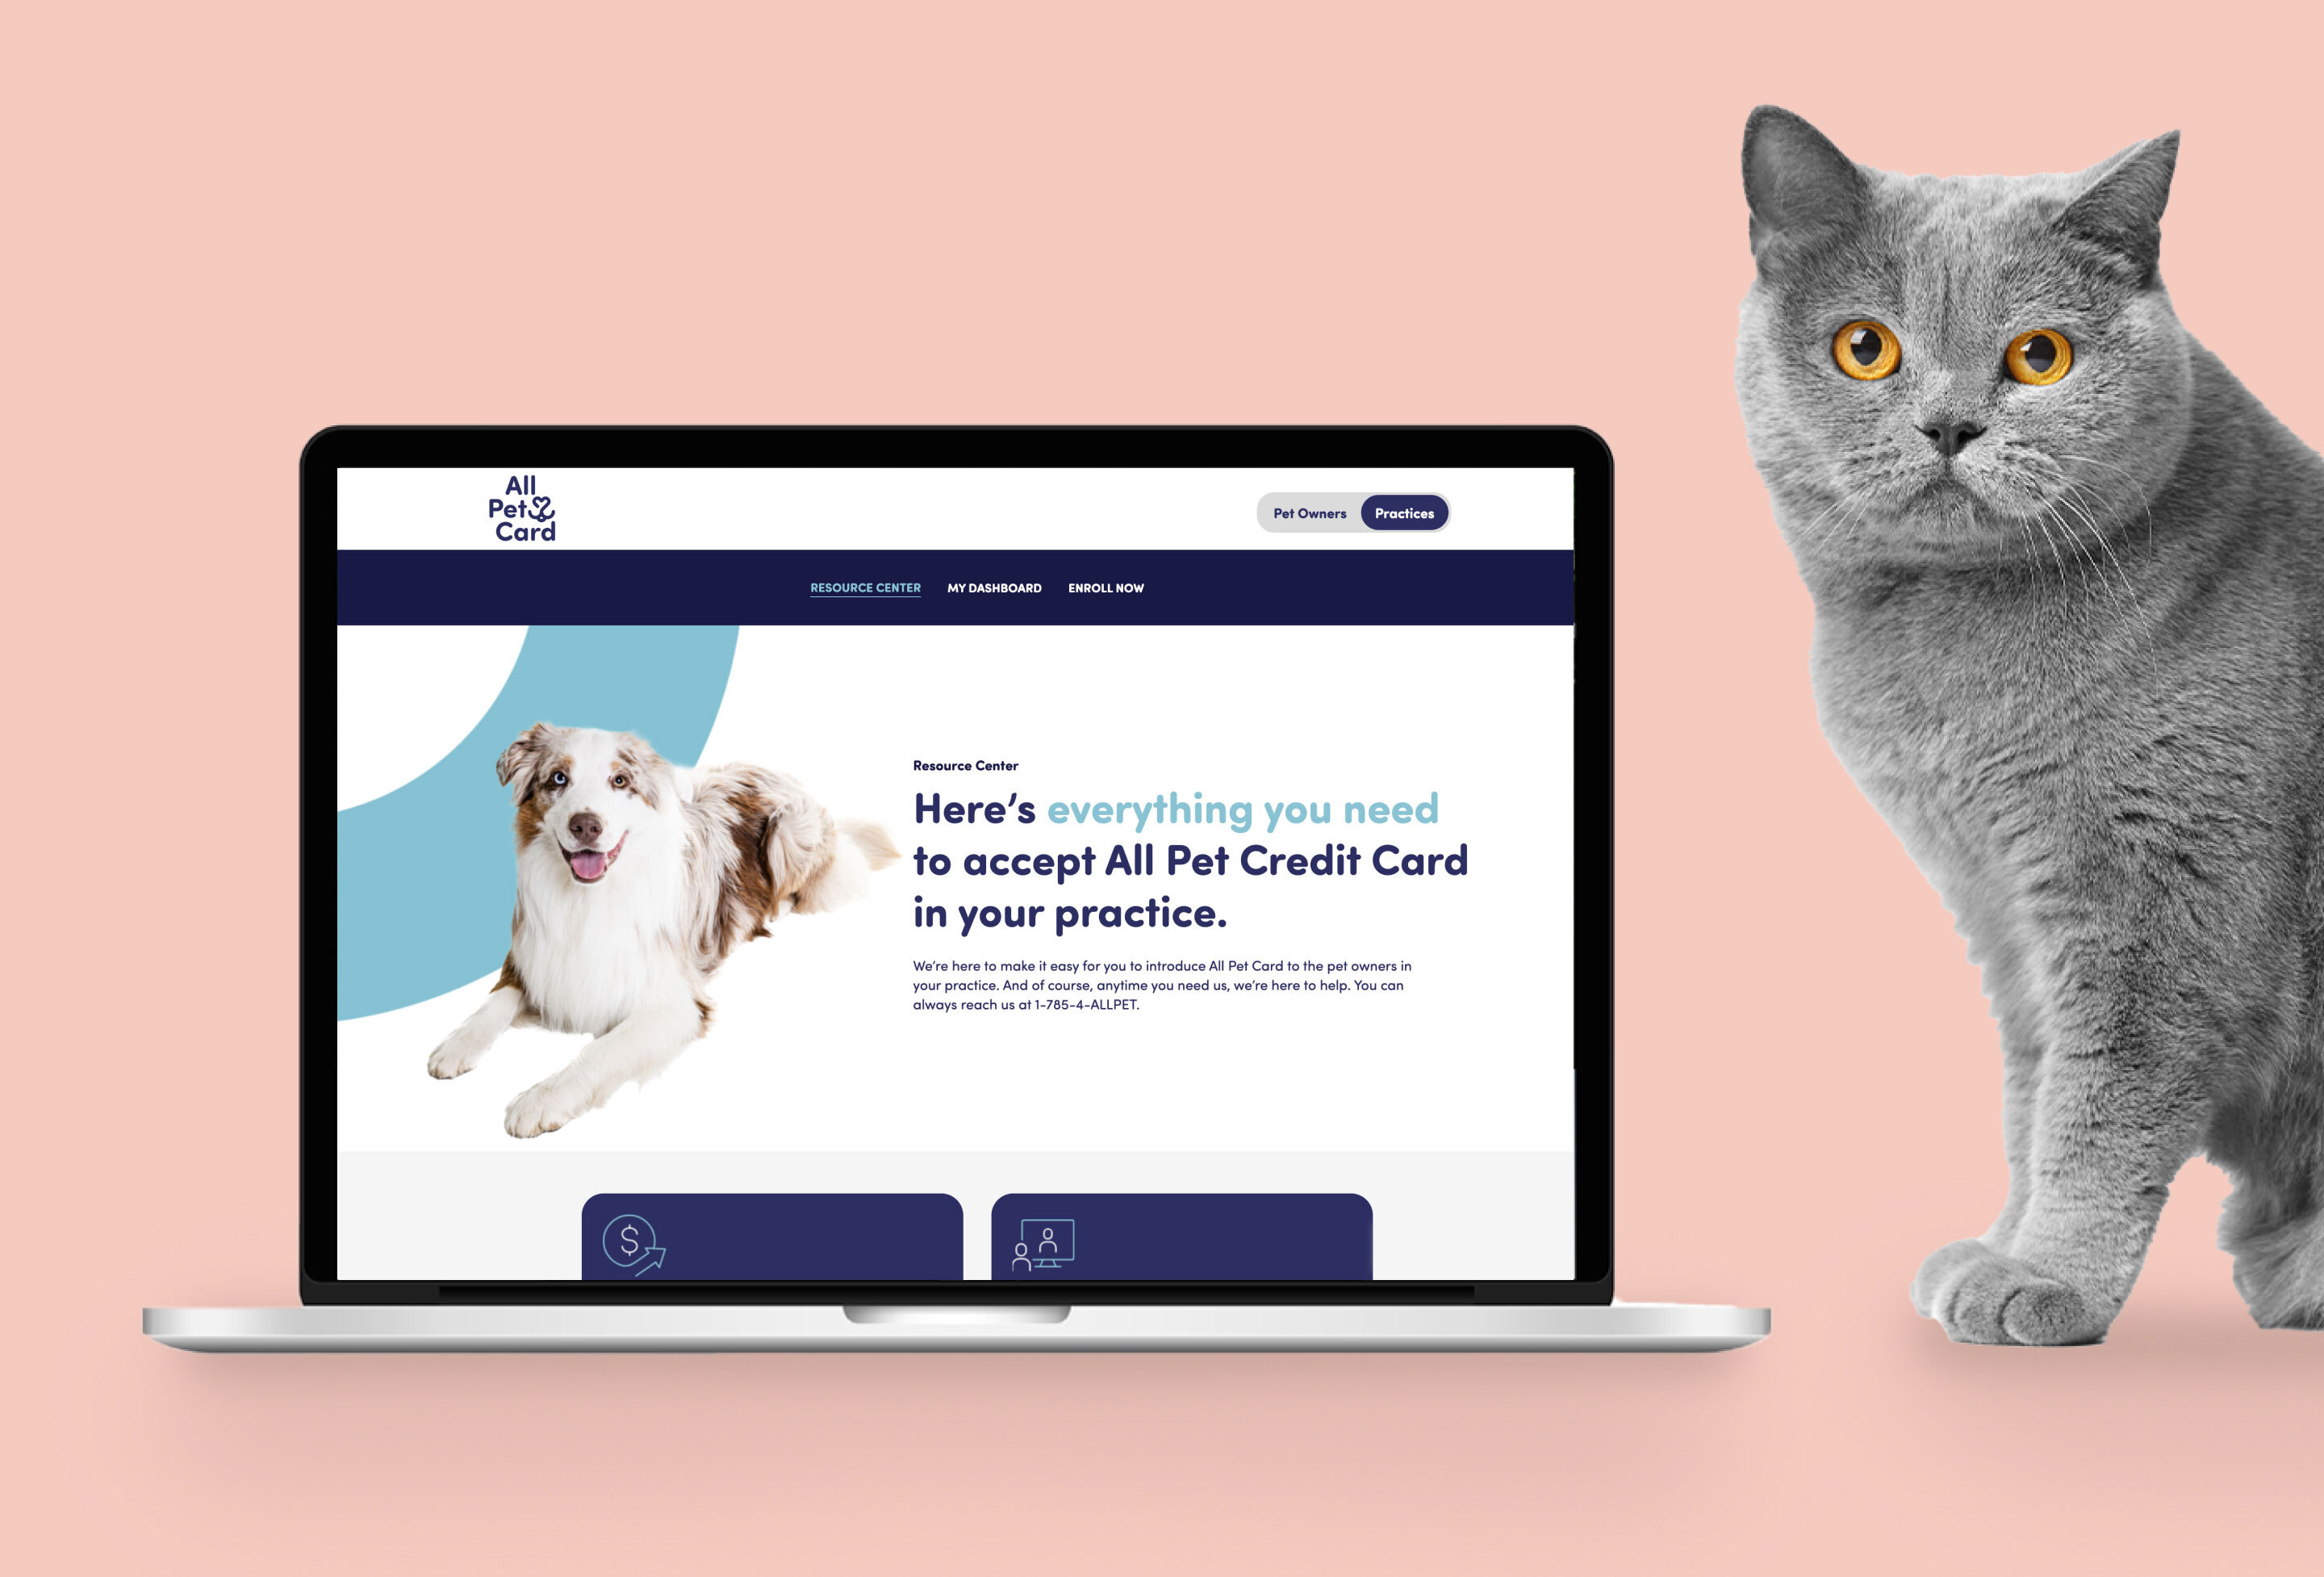 All Pet Card website page on a laptop screen